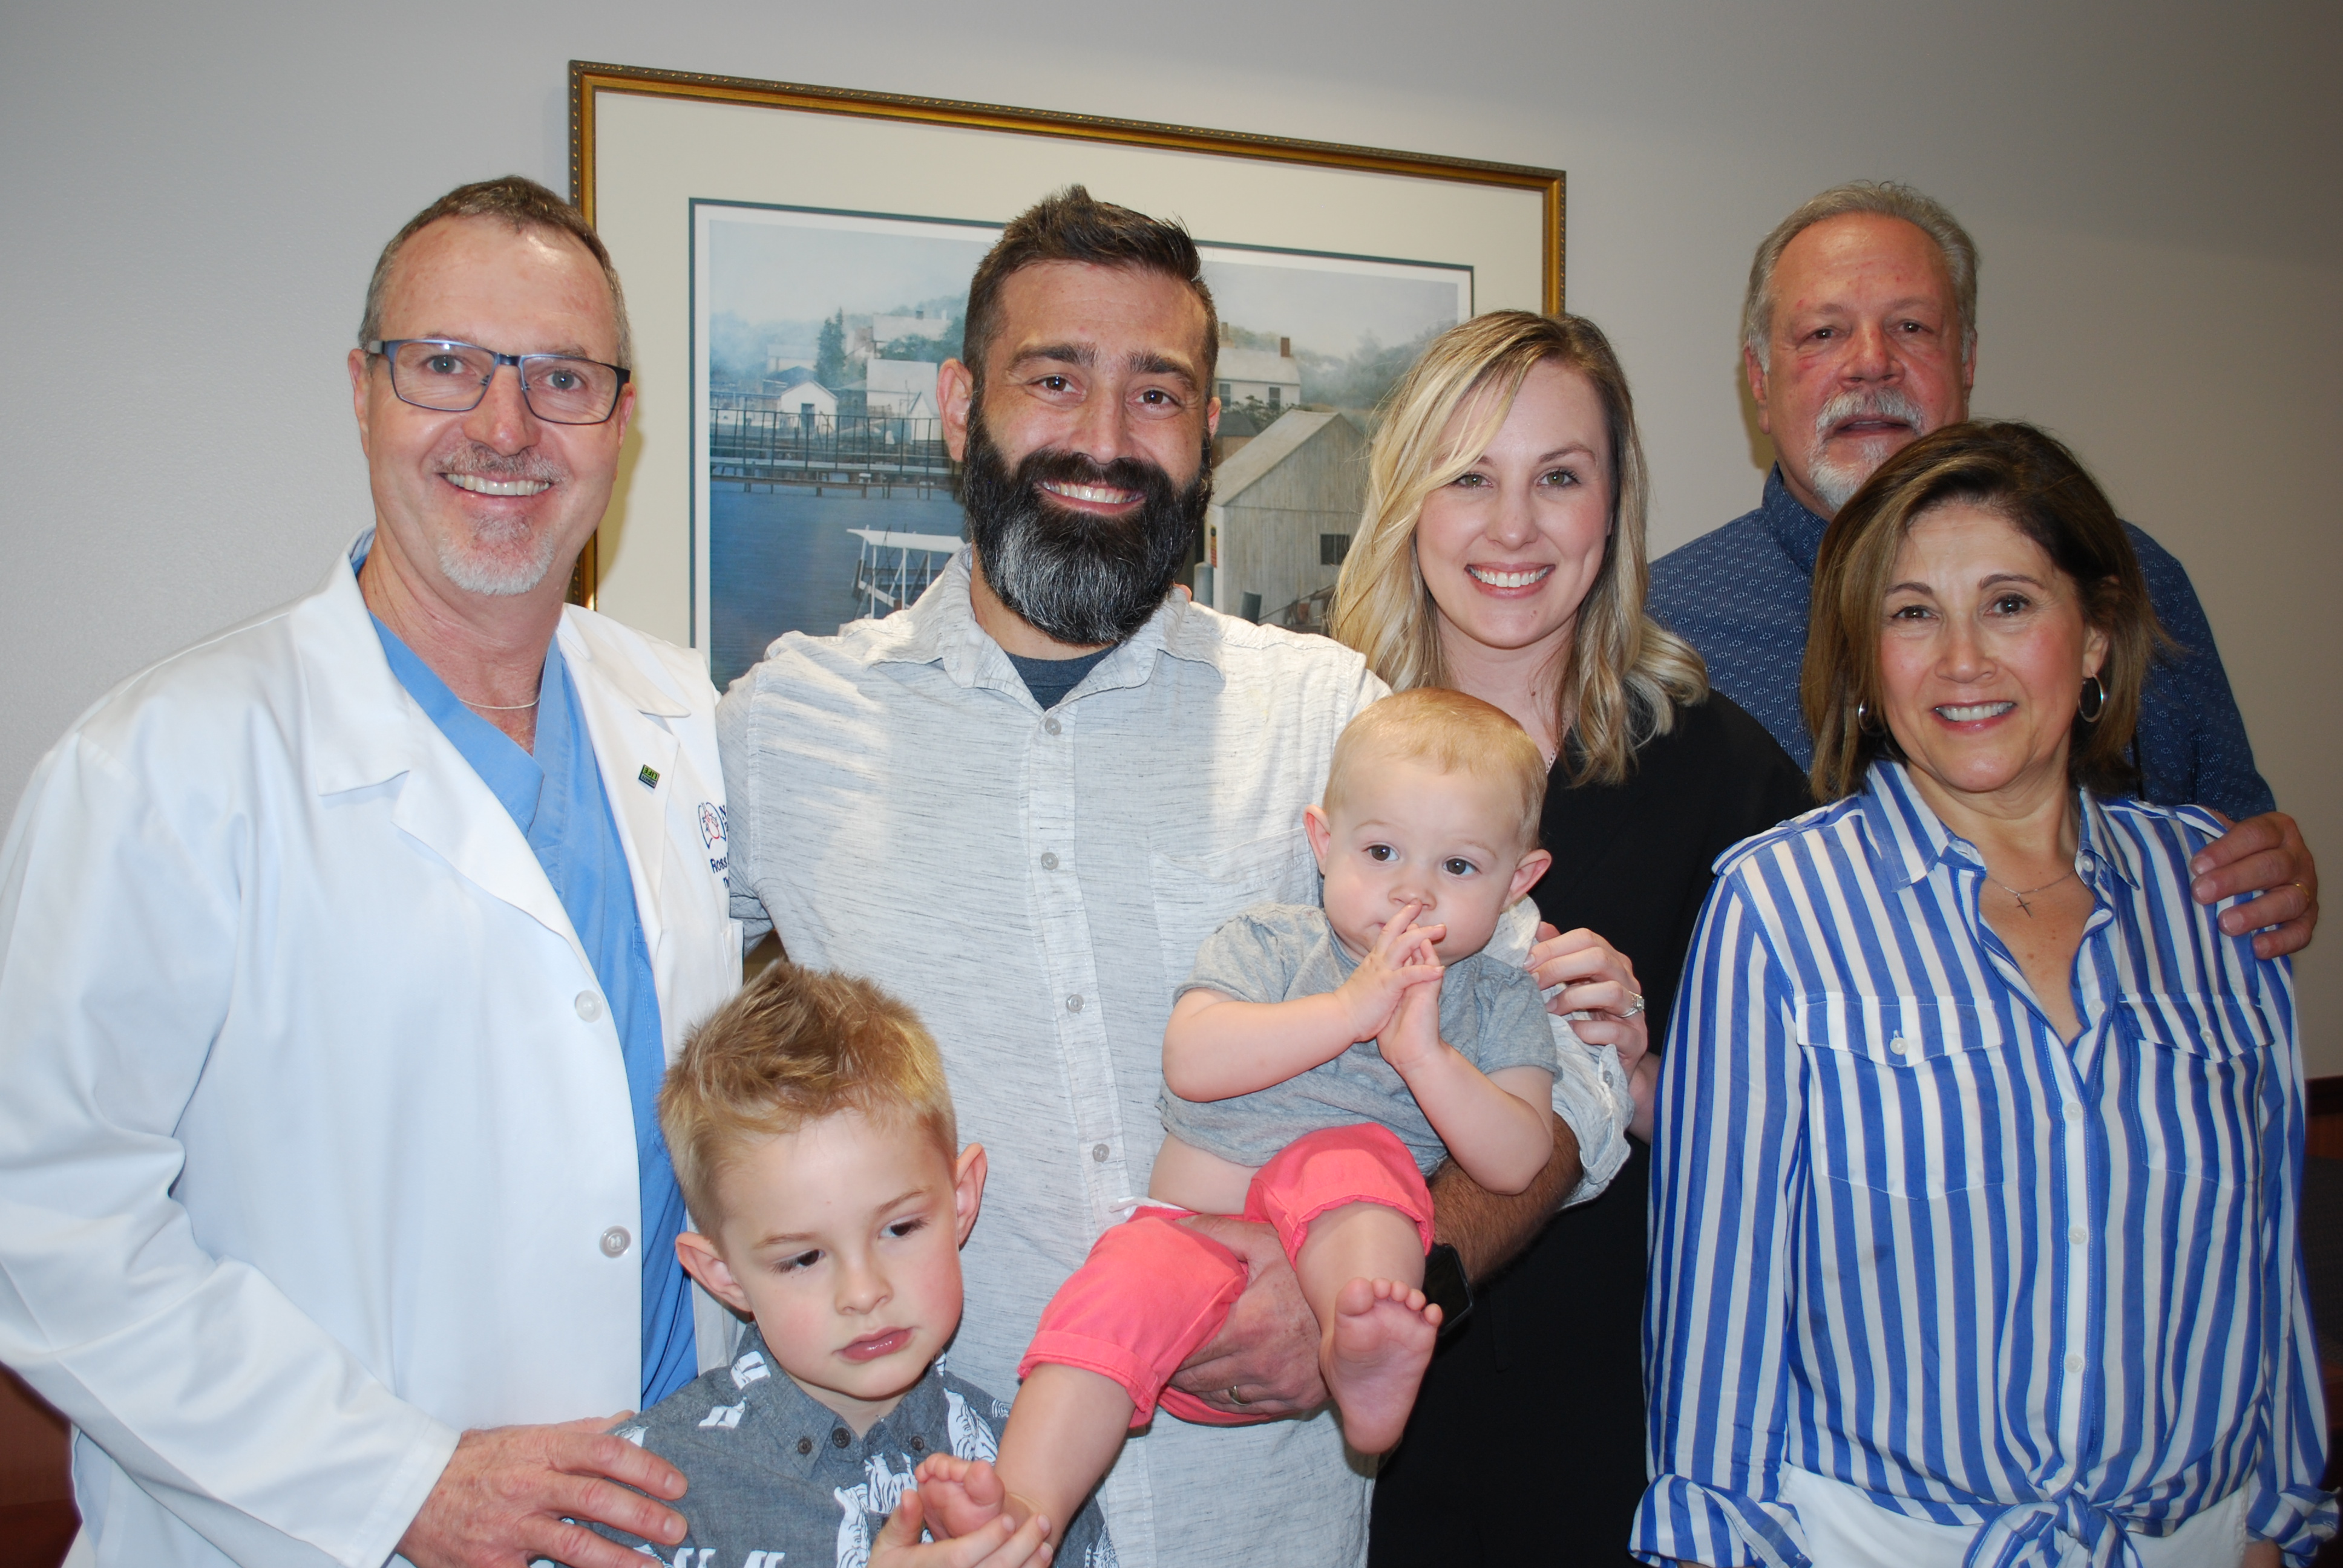 The Reuscher family and Dr. Ross Bremner